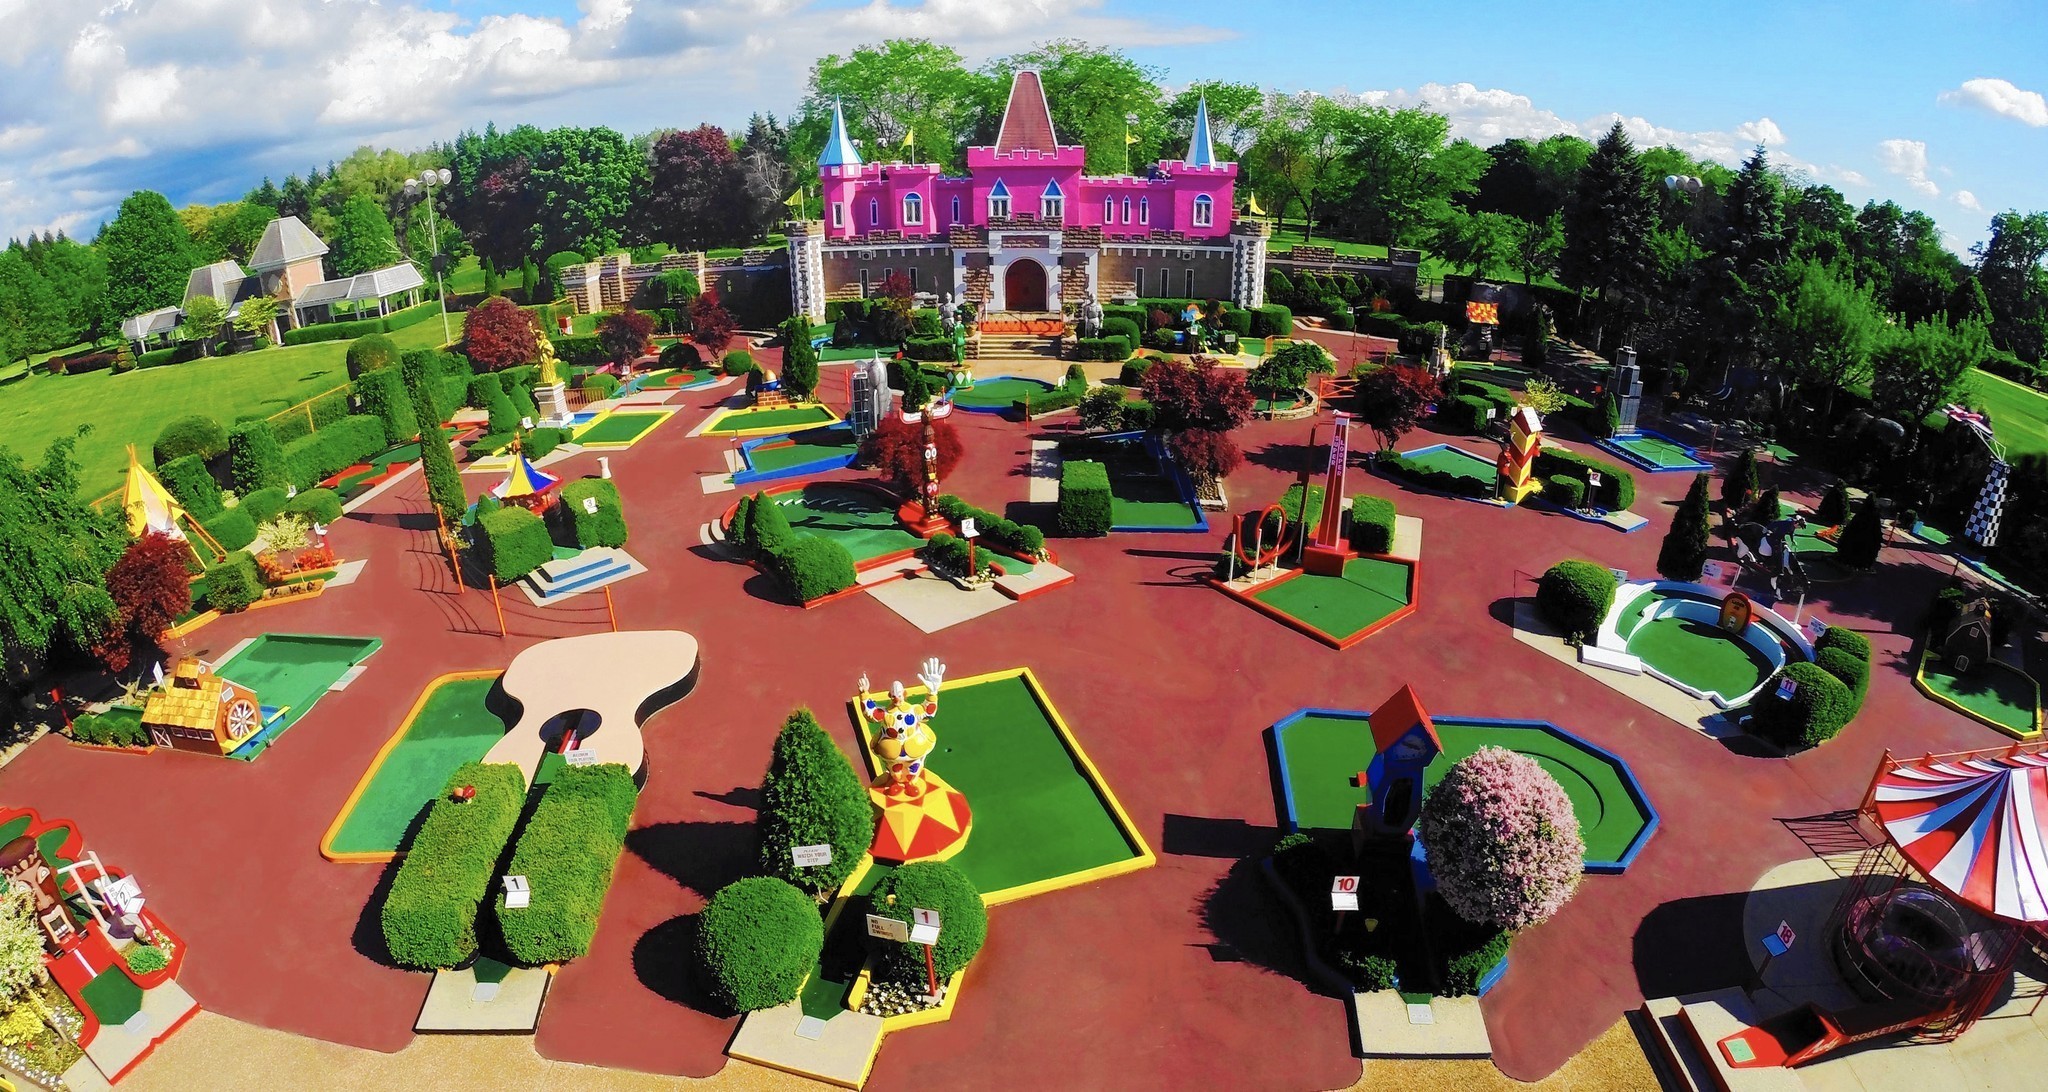 10 Theme Mini Golf Courses You Should Check Out in the US | Golf Holiday Reviews